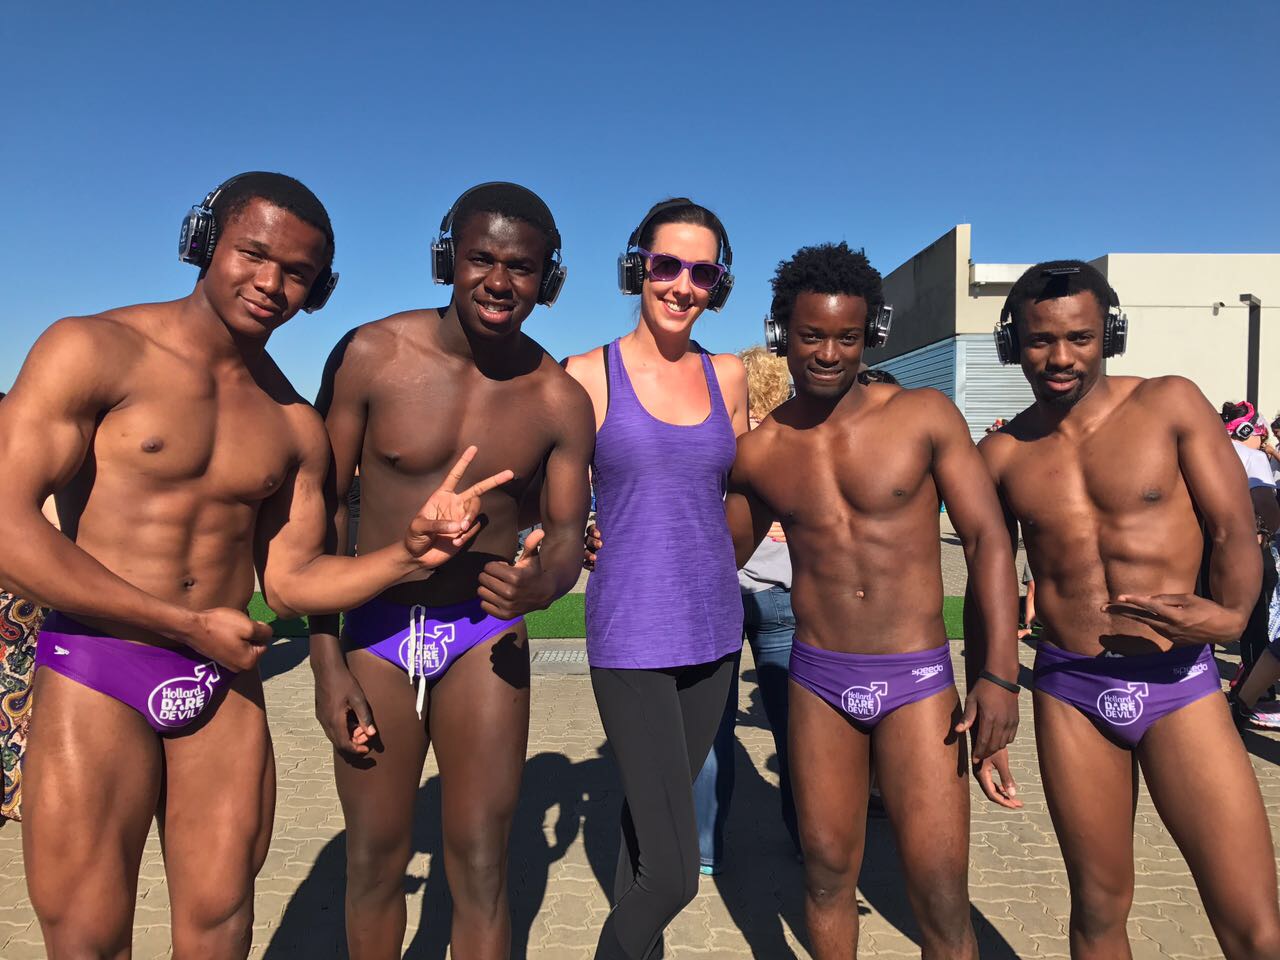 Daredevils take male cancer fight to the streets in Speedos